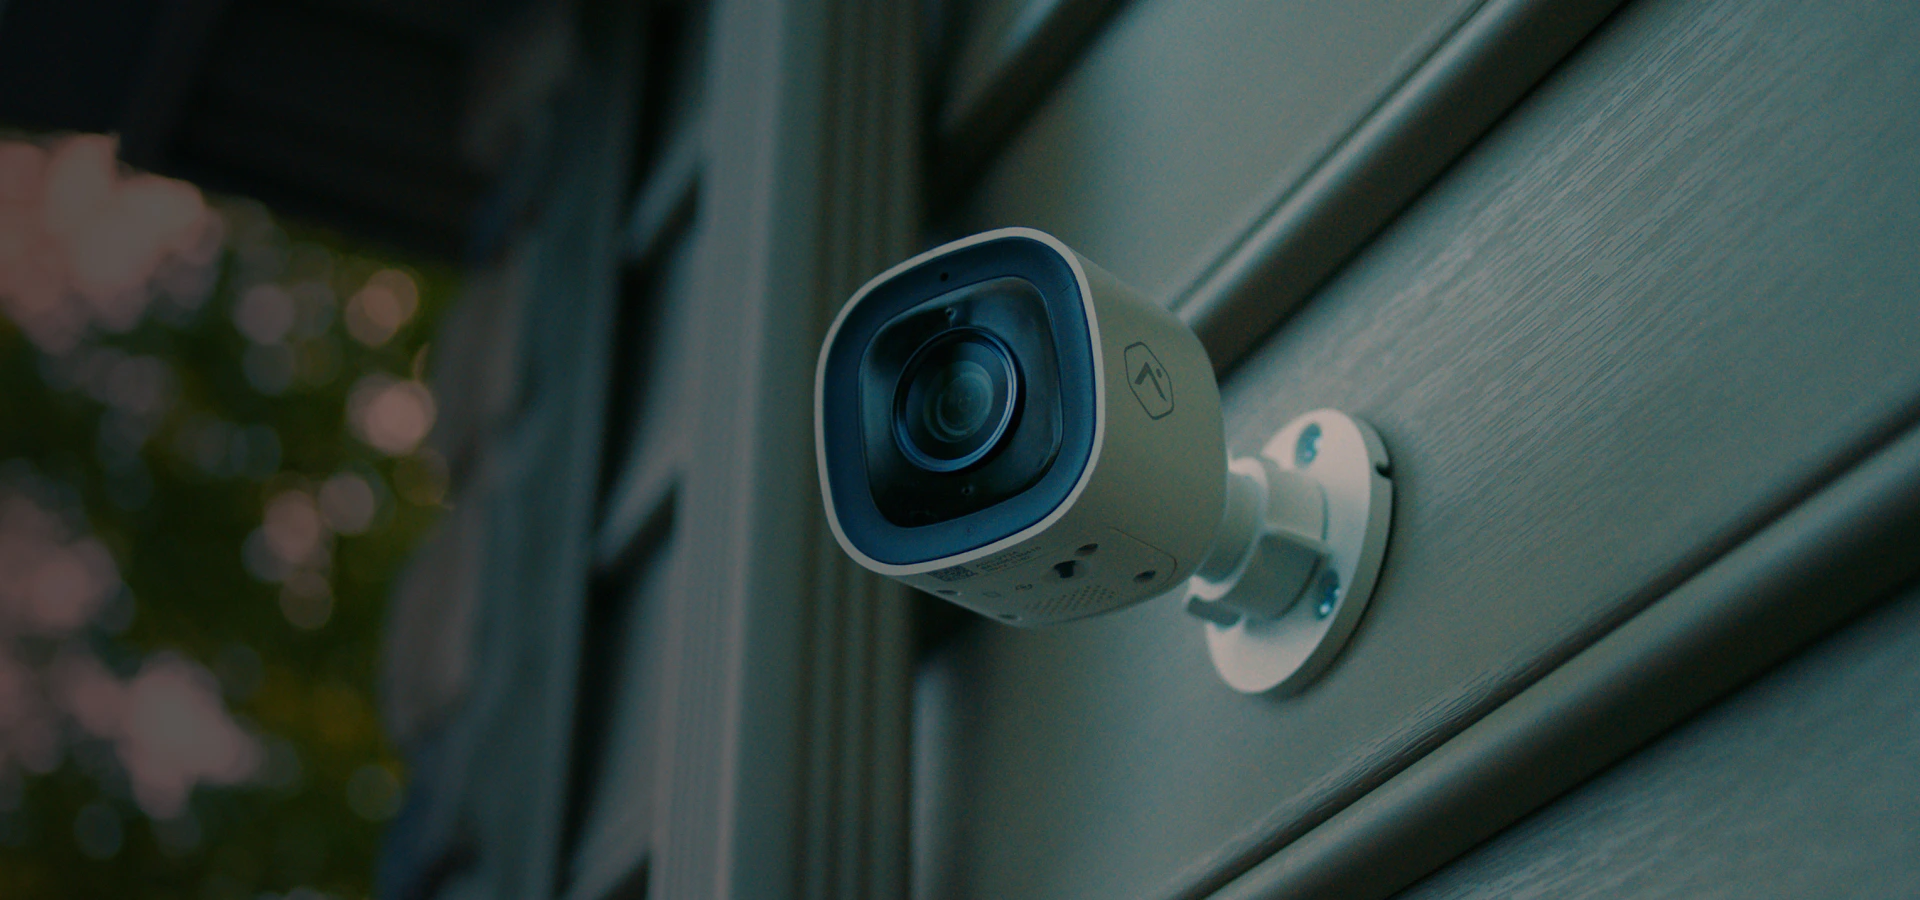 security cam system installed outside a house